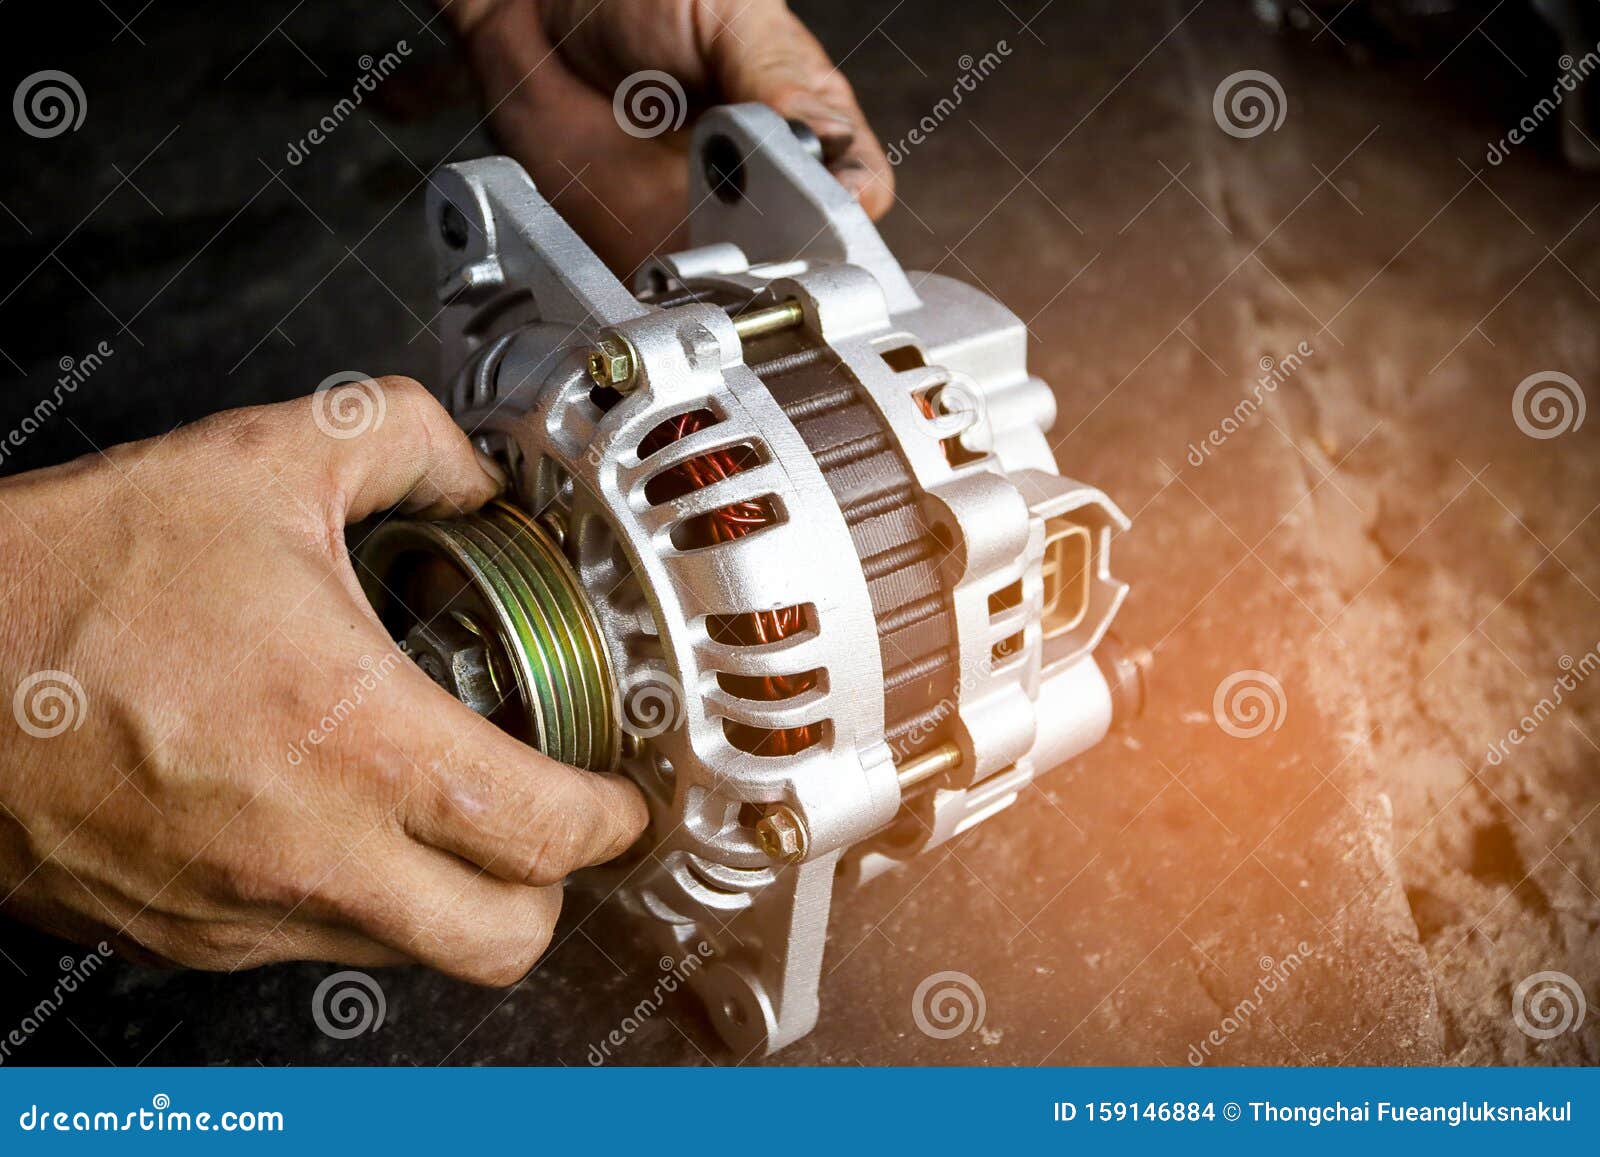 change new car alternator with hand in the garage or auto repair service center, as background automotive concept. dark tone